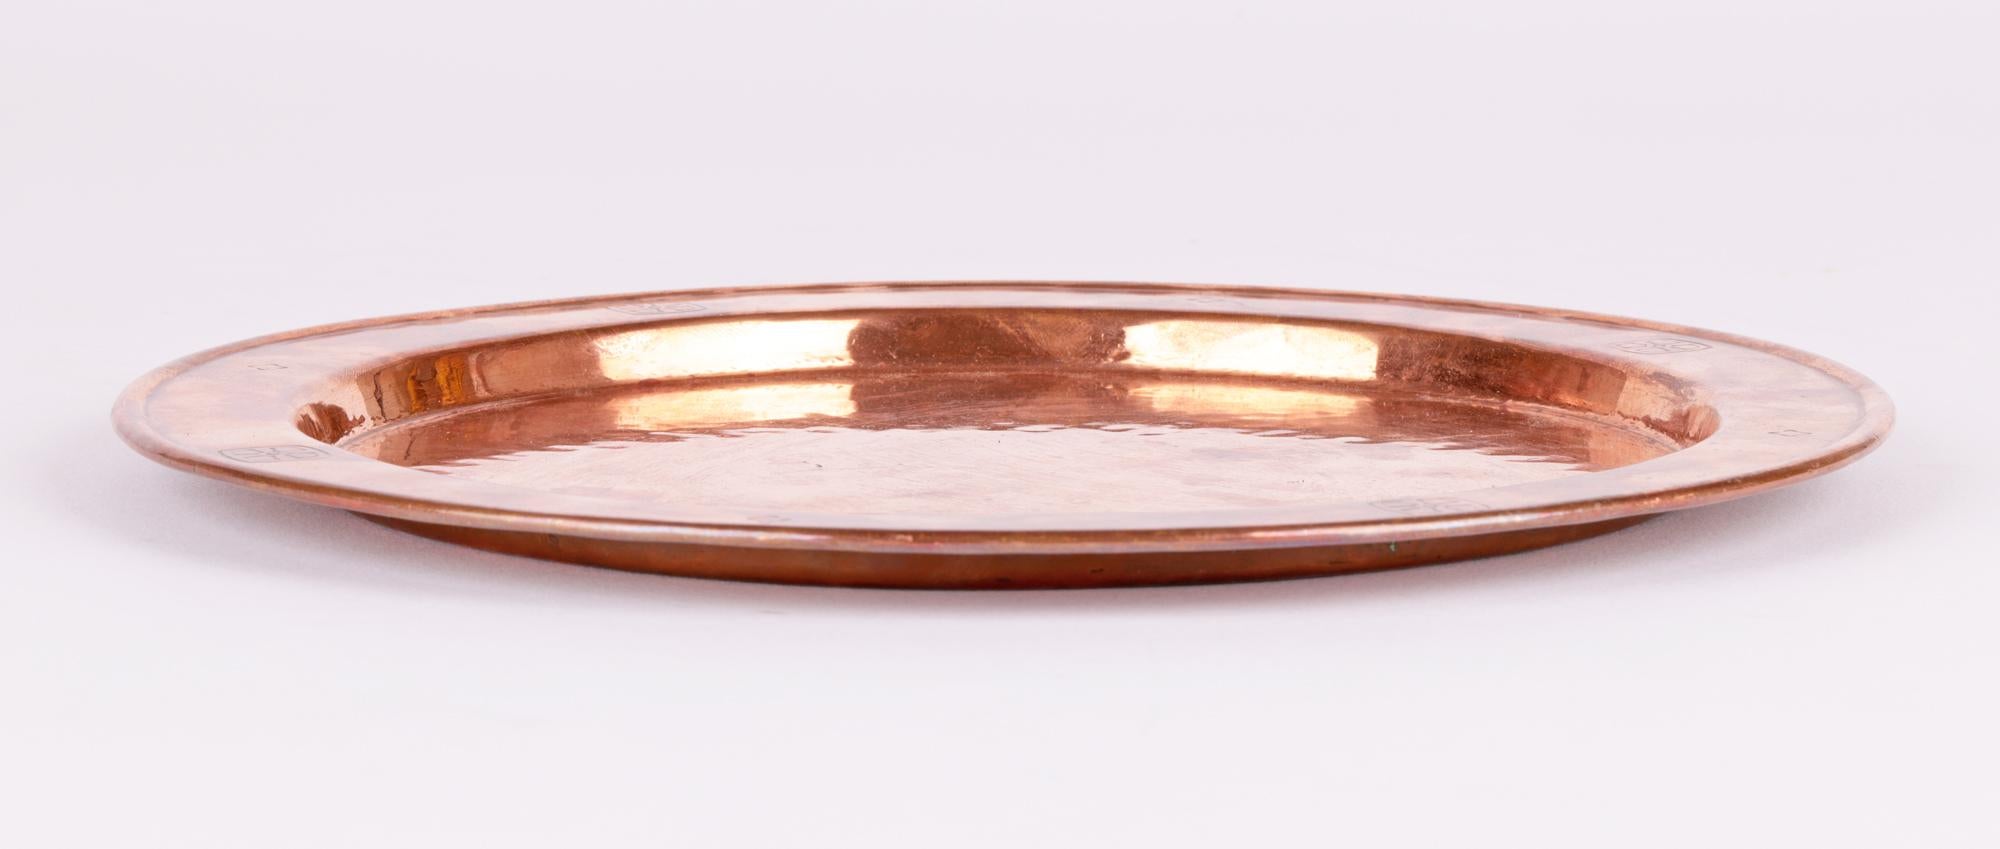 A stylish and heavily hand-crafted Birmingham Guild Arts & Crafts copper paten or tray dating from around 1915. The tray of flat circular shape has a raised flat rim decorated with incised cross designs in a pagan or Pugin style with smaller designs